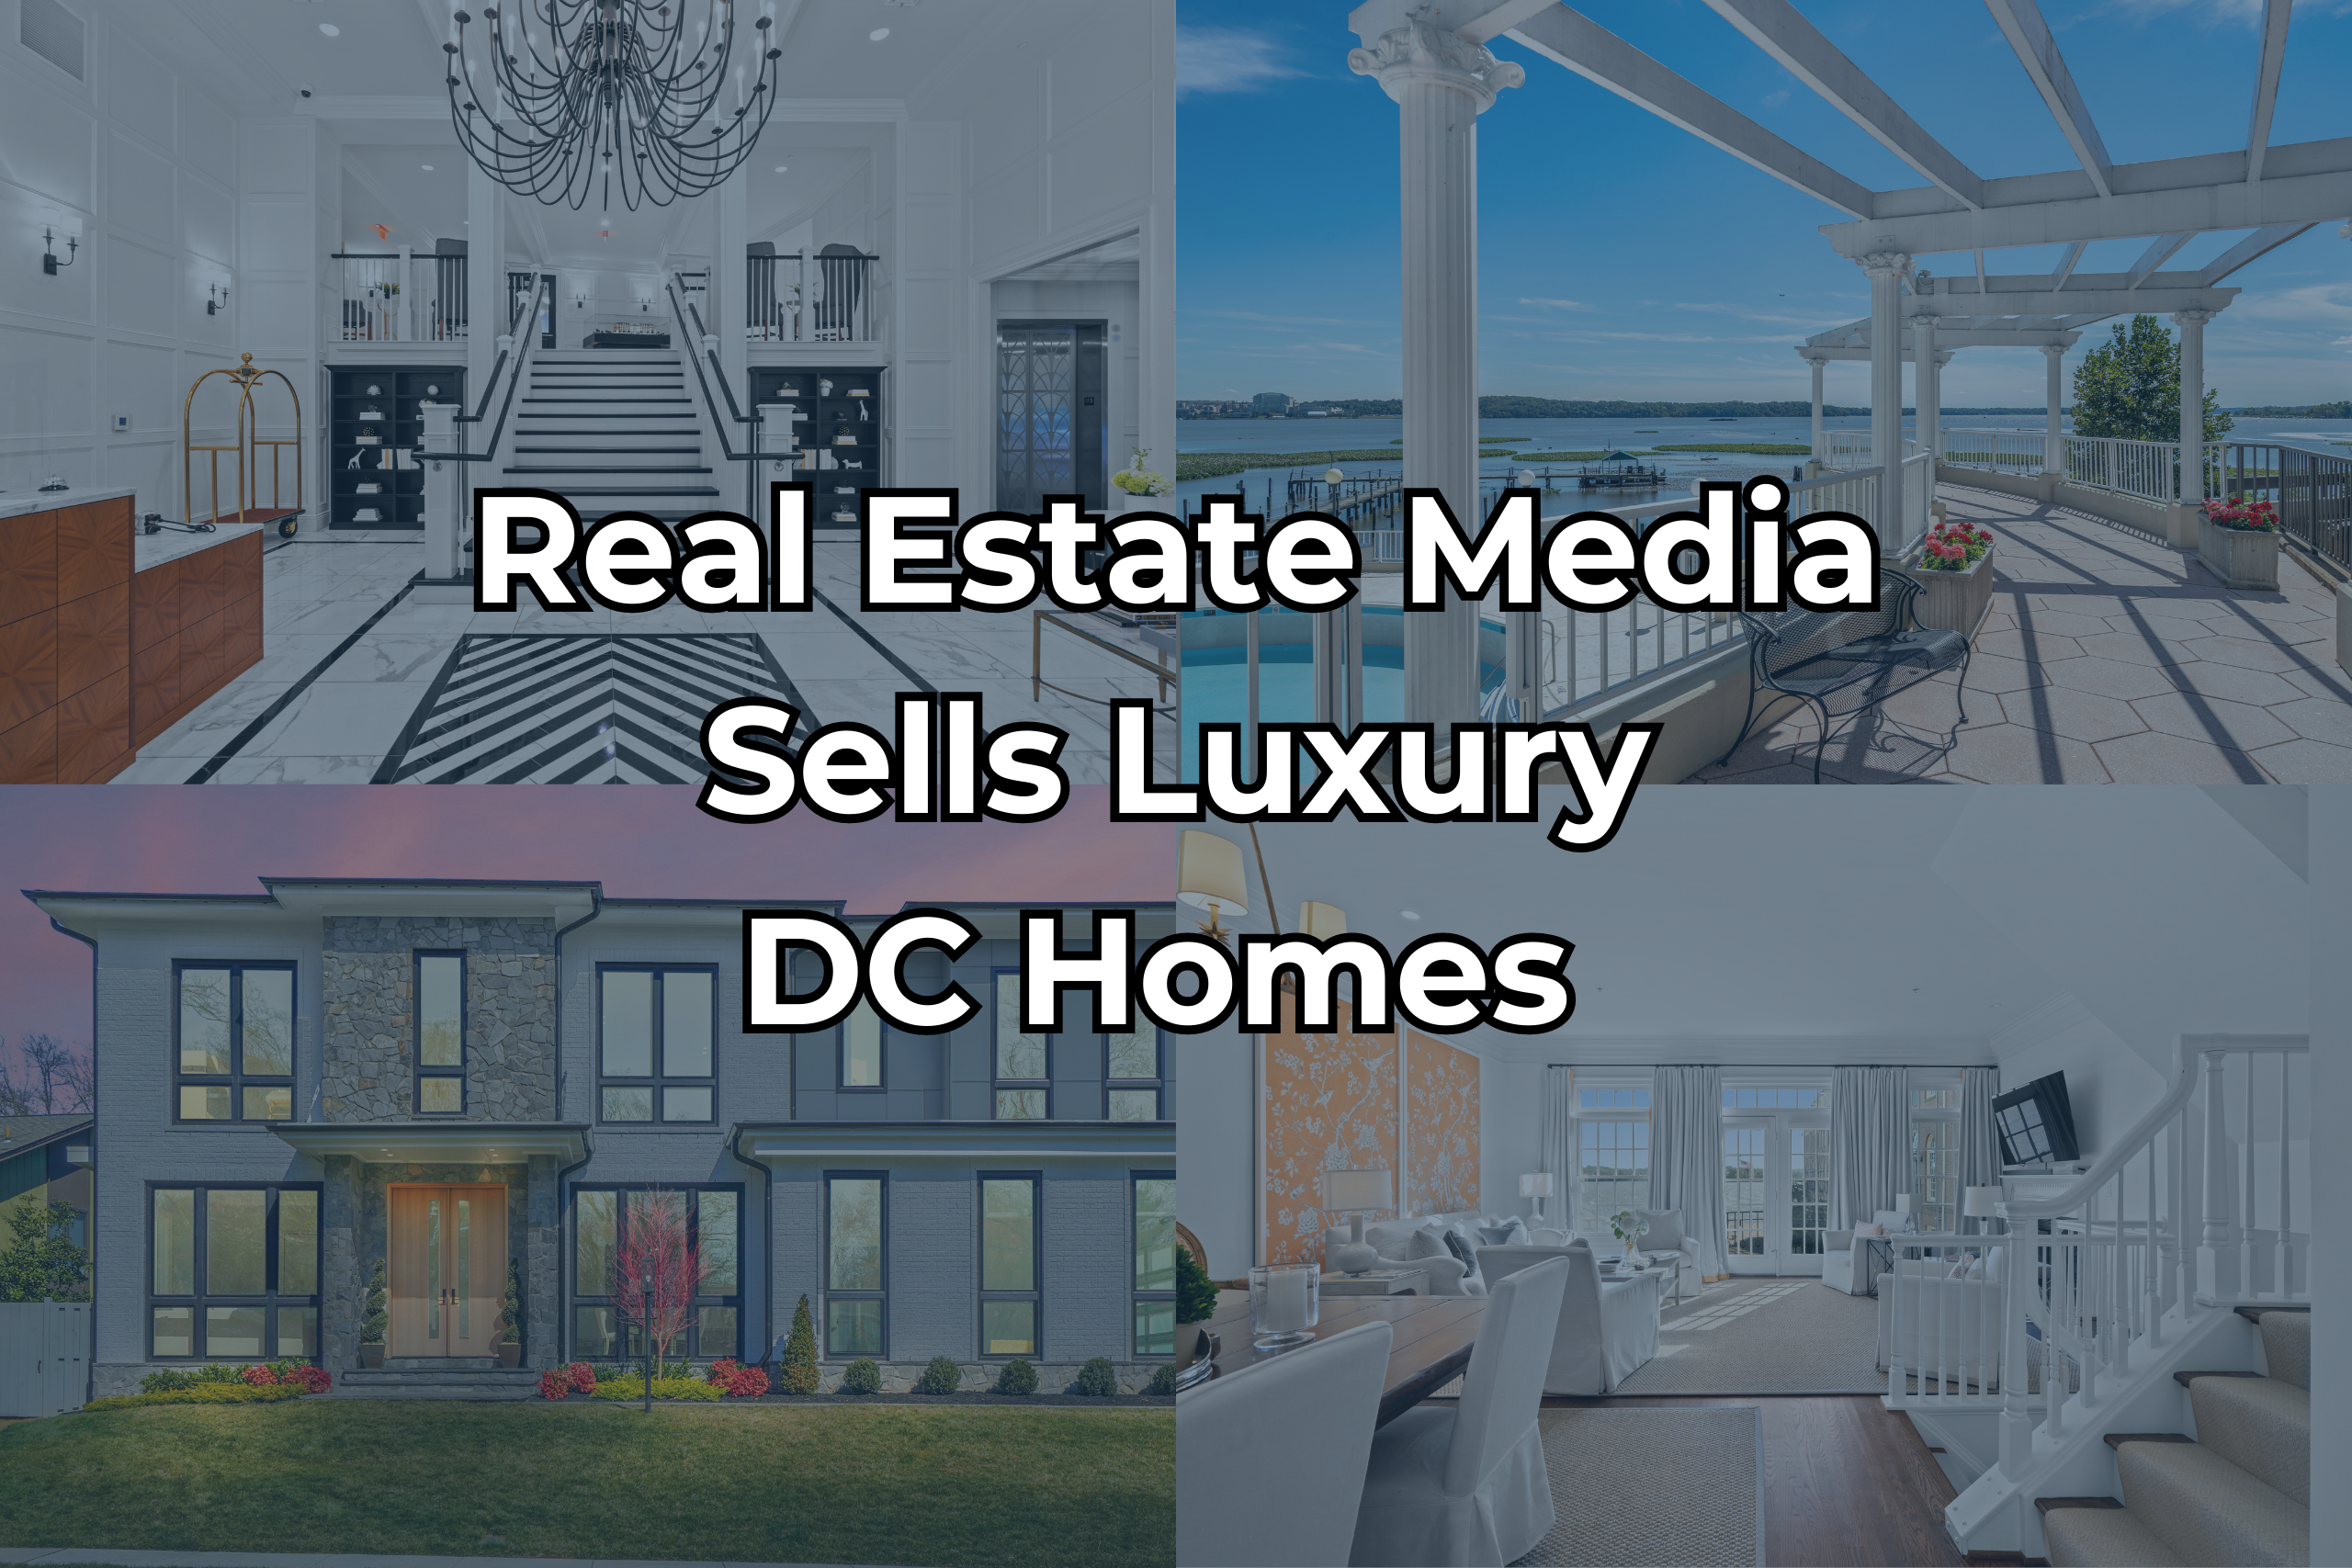 Market luxury homes in Washington DC with top real estate media products. Captivate elite buyers and sell your million-dollar listings fast.